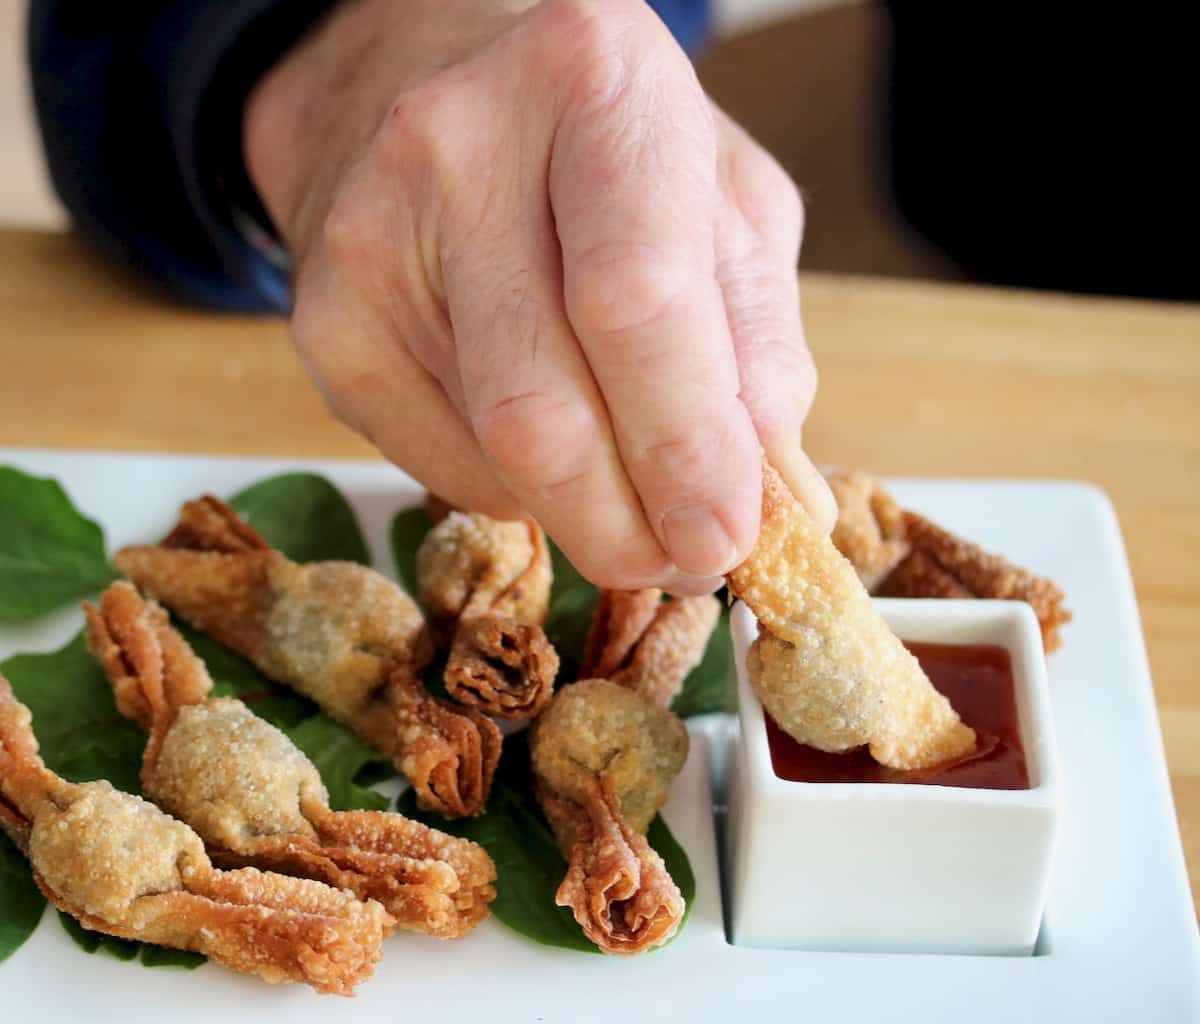 Hand holding wonton and dipping in sauce.